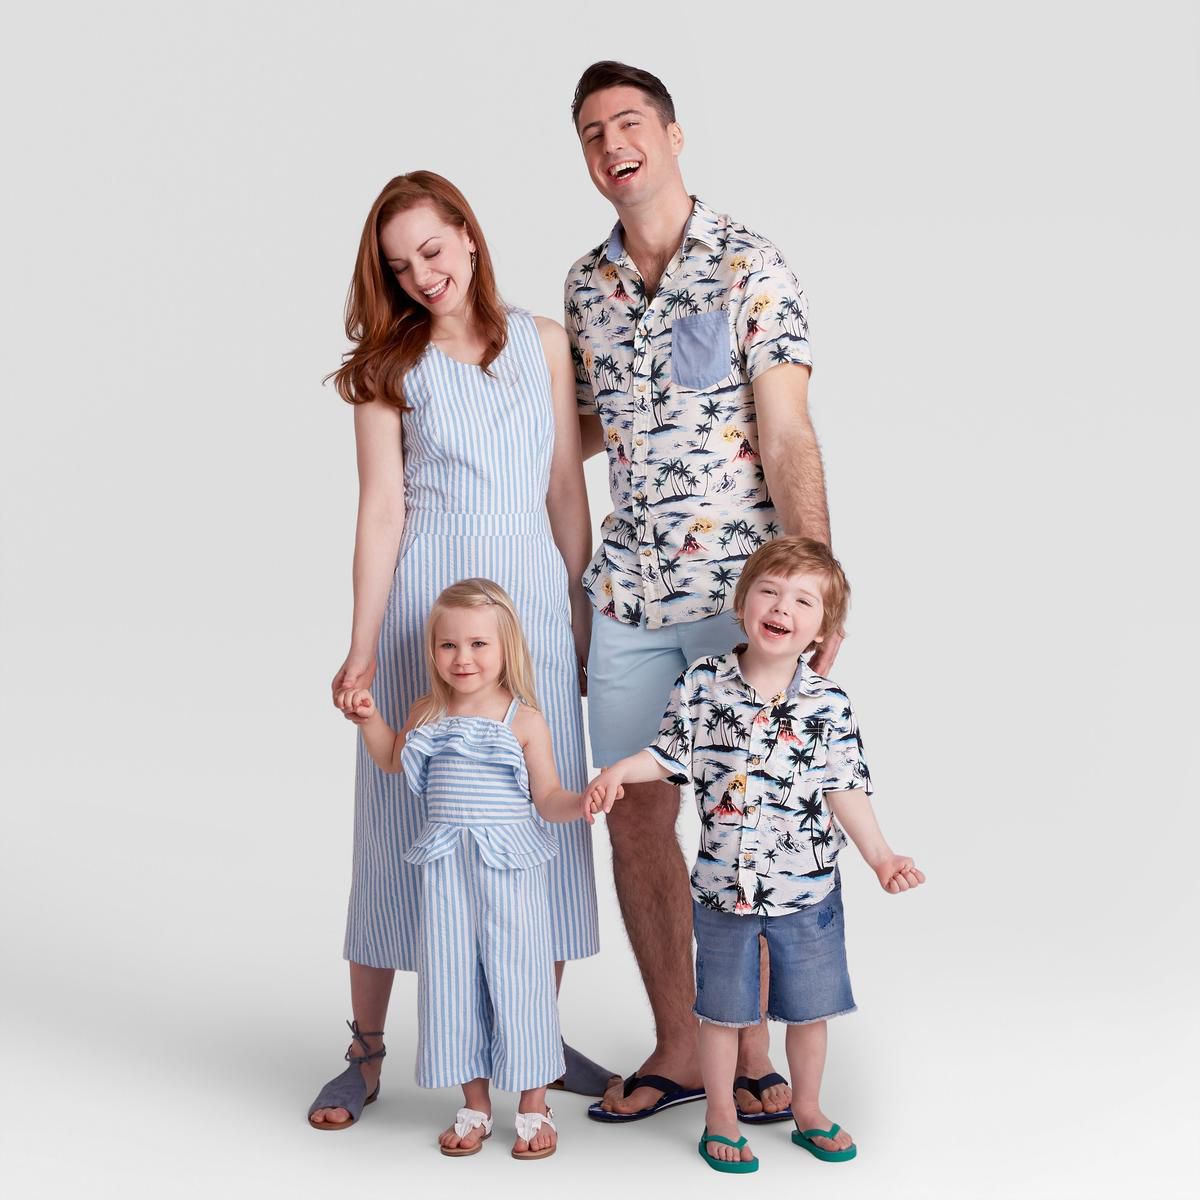 Target's Matching Family Collection